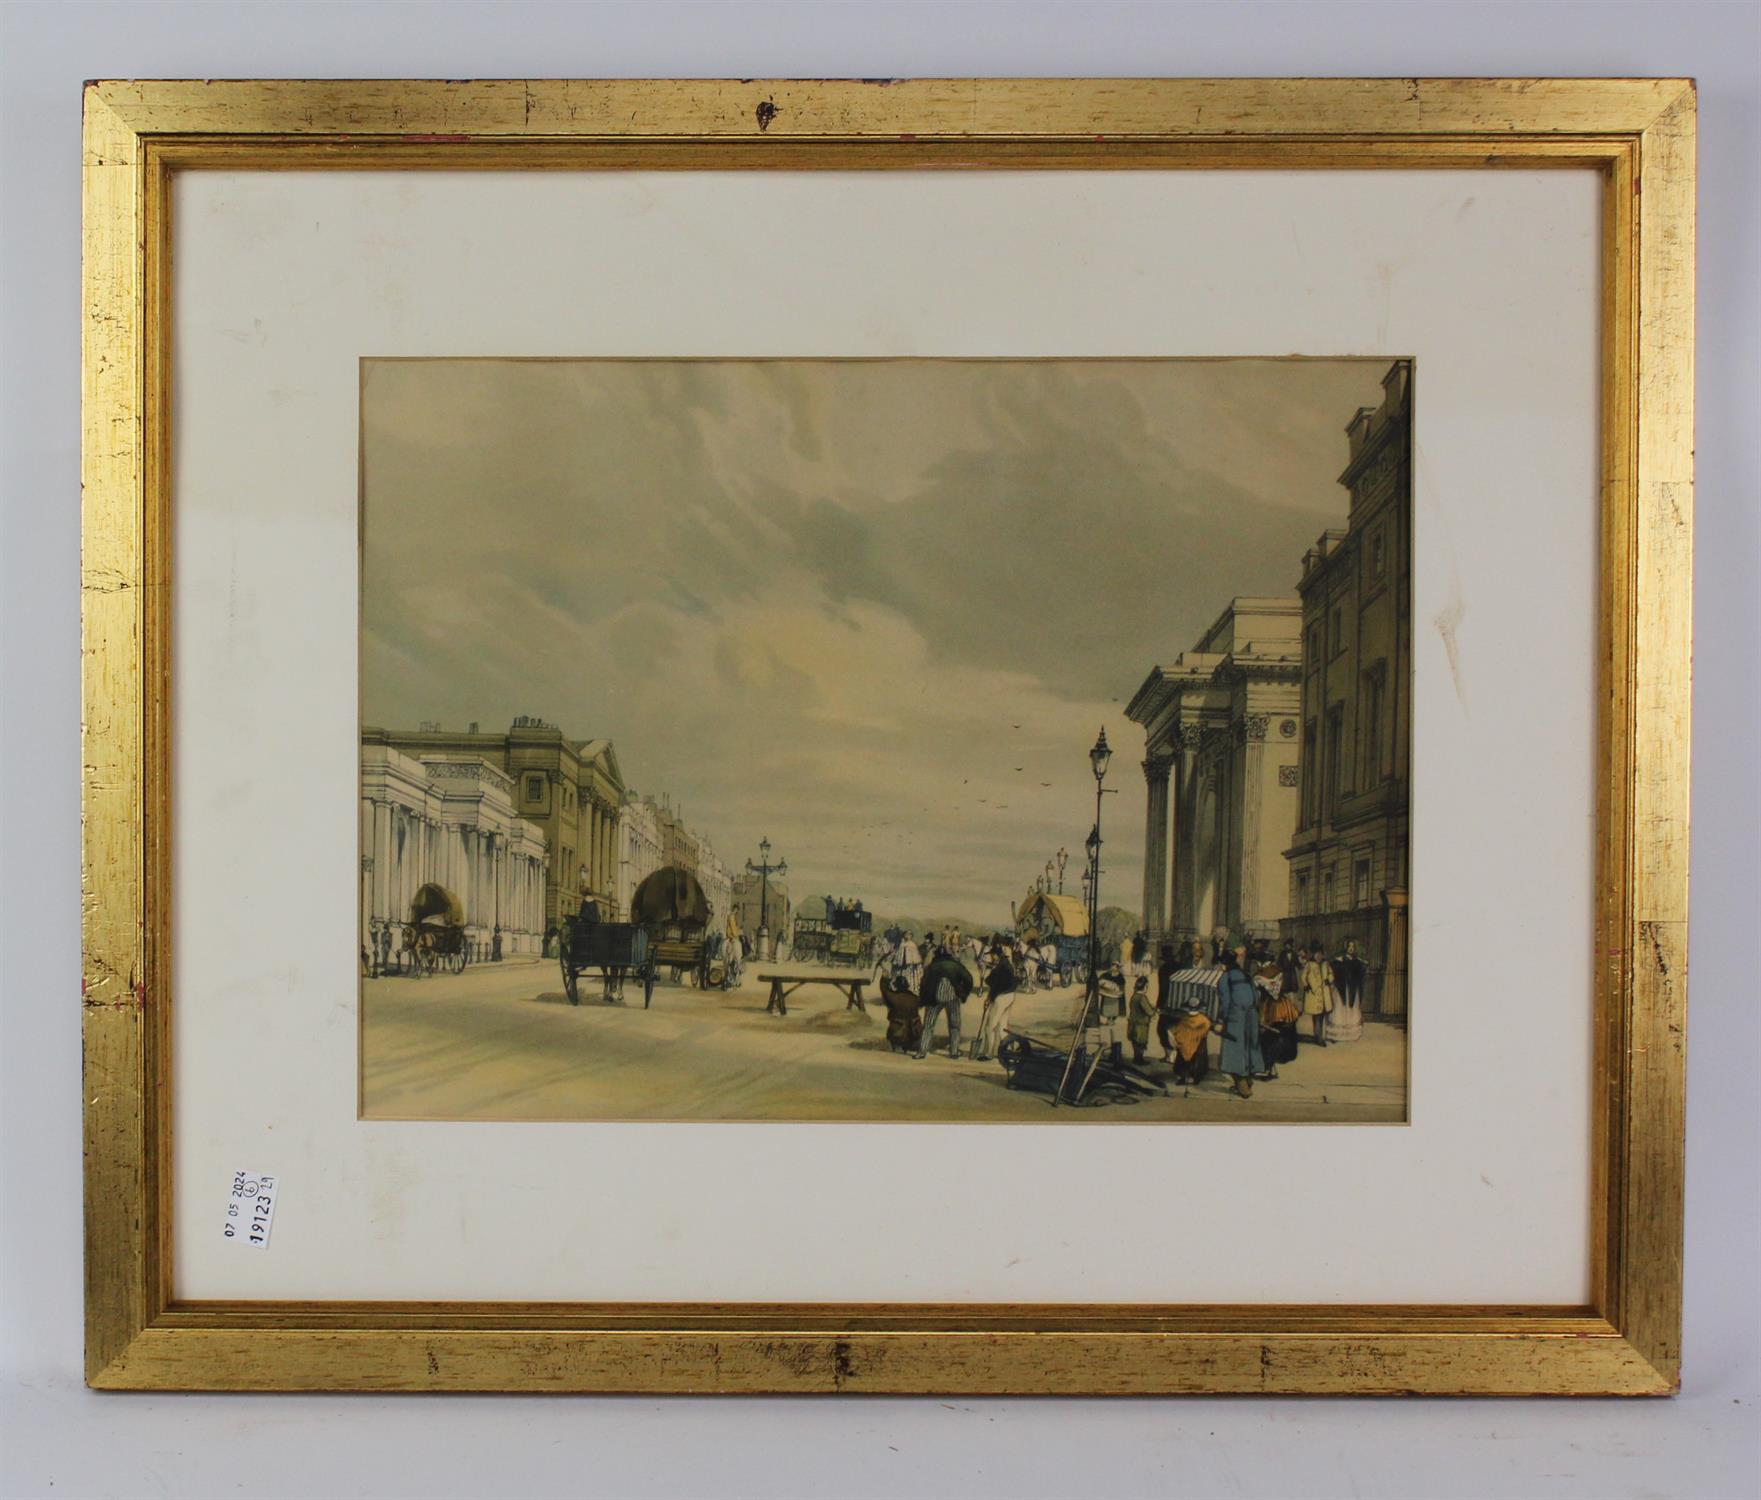 Martin **** (20th century), View of a Continental Walled Town, limited edition lithograph 19/175, - Image 3 of 6